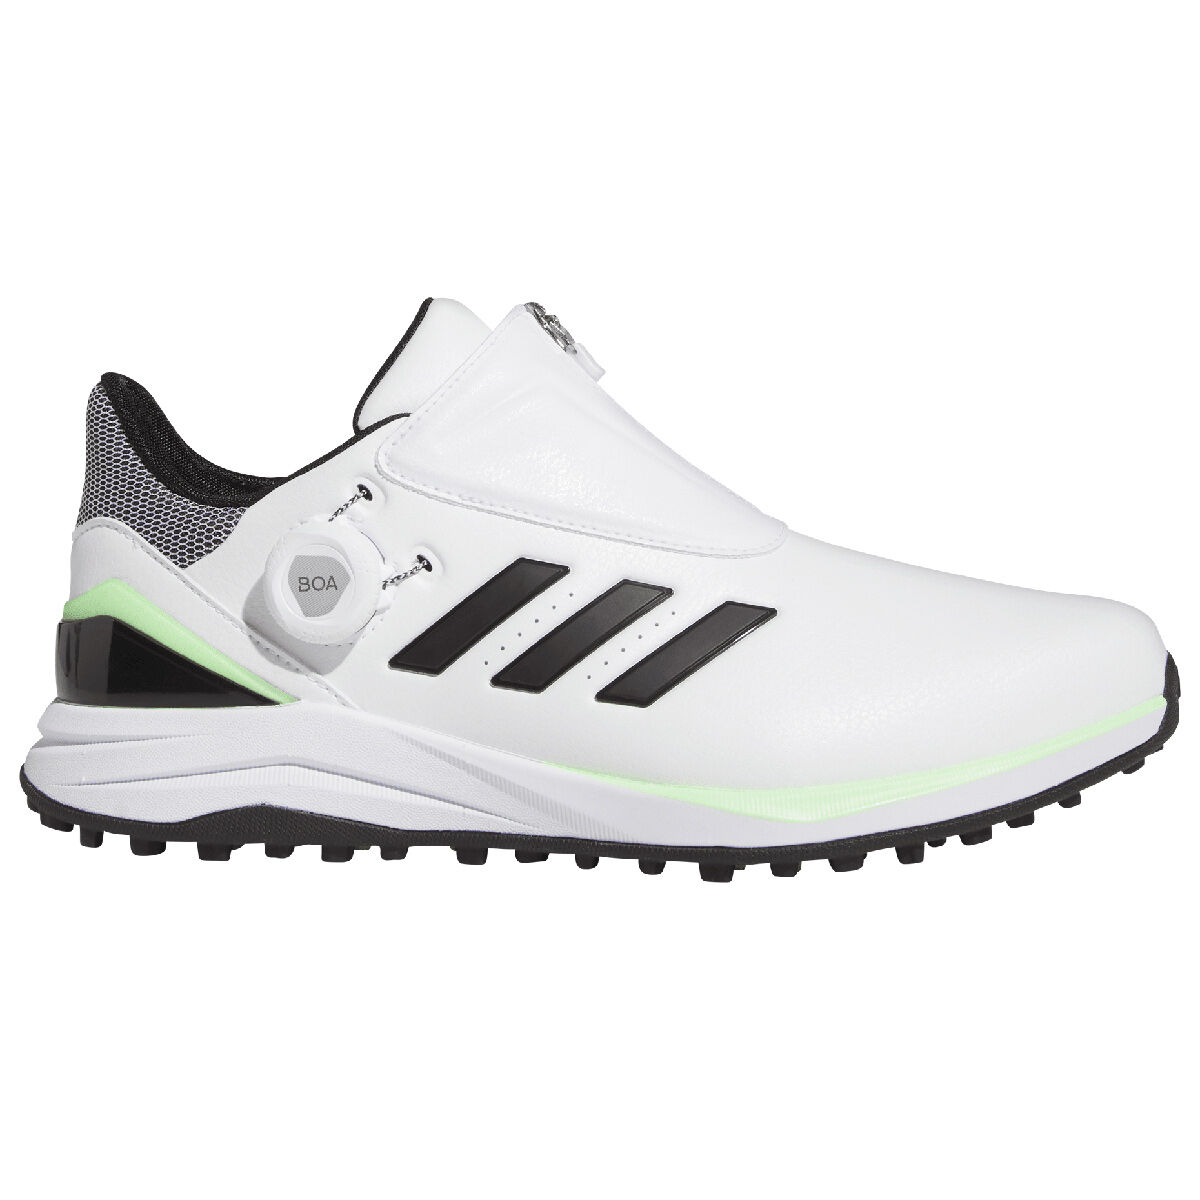 adidas SOLARmotion BOA Spikeless Waterproof Golf Shoes, Mens, White/core black/green spark, 7 | American Golf